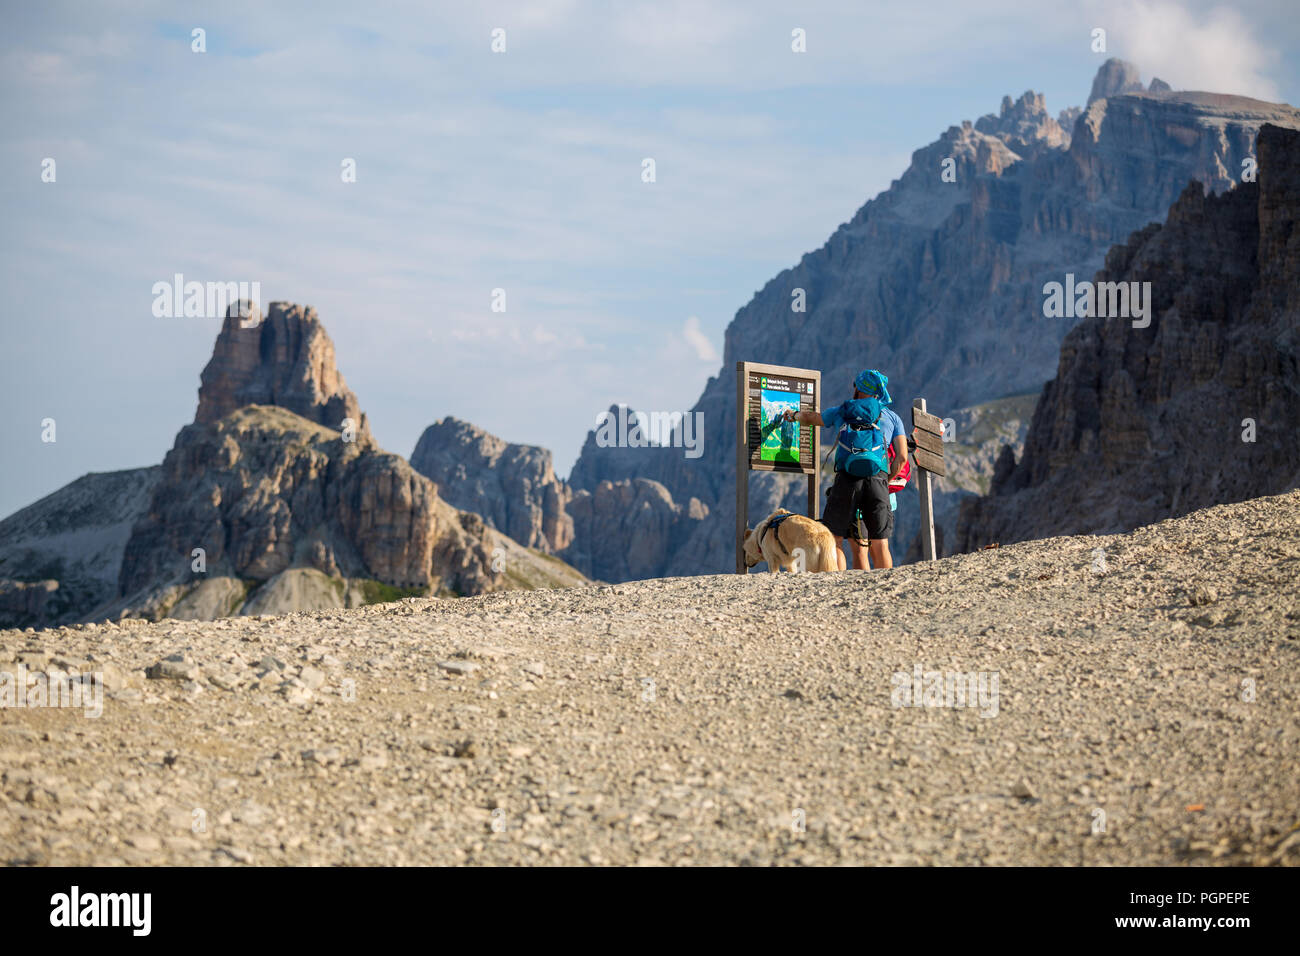 Auronzo di Cadore, Dolomite, Italy - 08-25-2018: a guy on the top of the mountain looking at the map Stock Photo